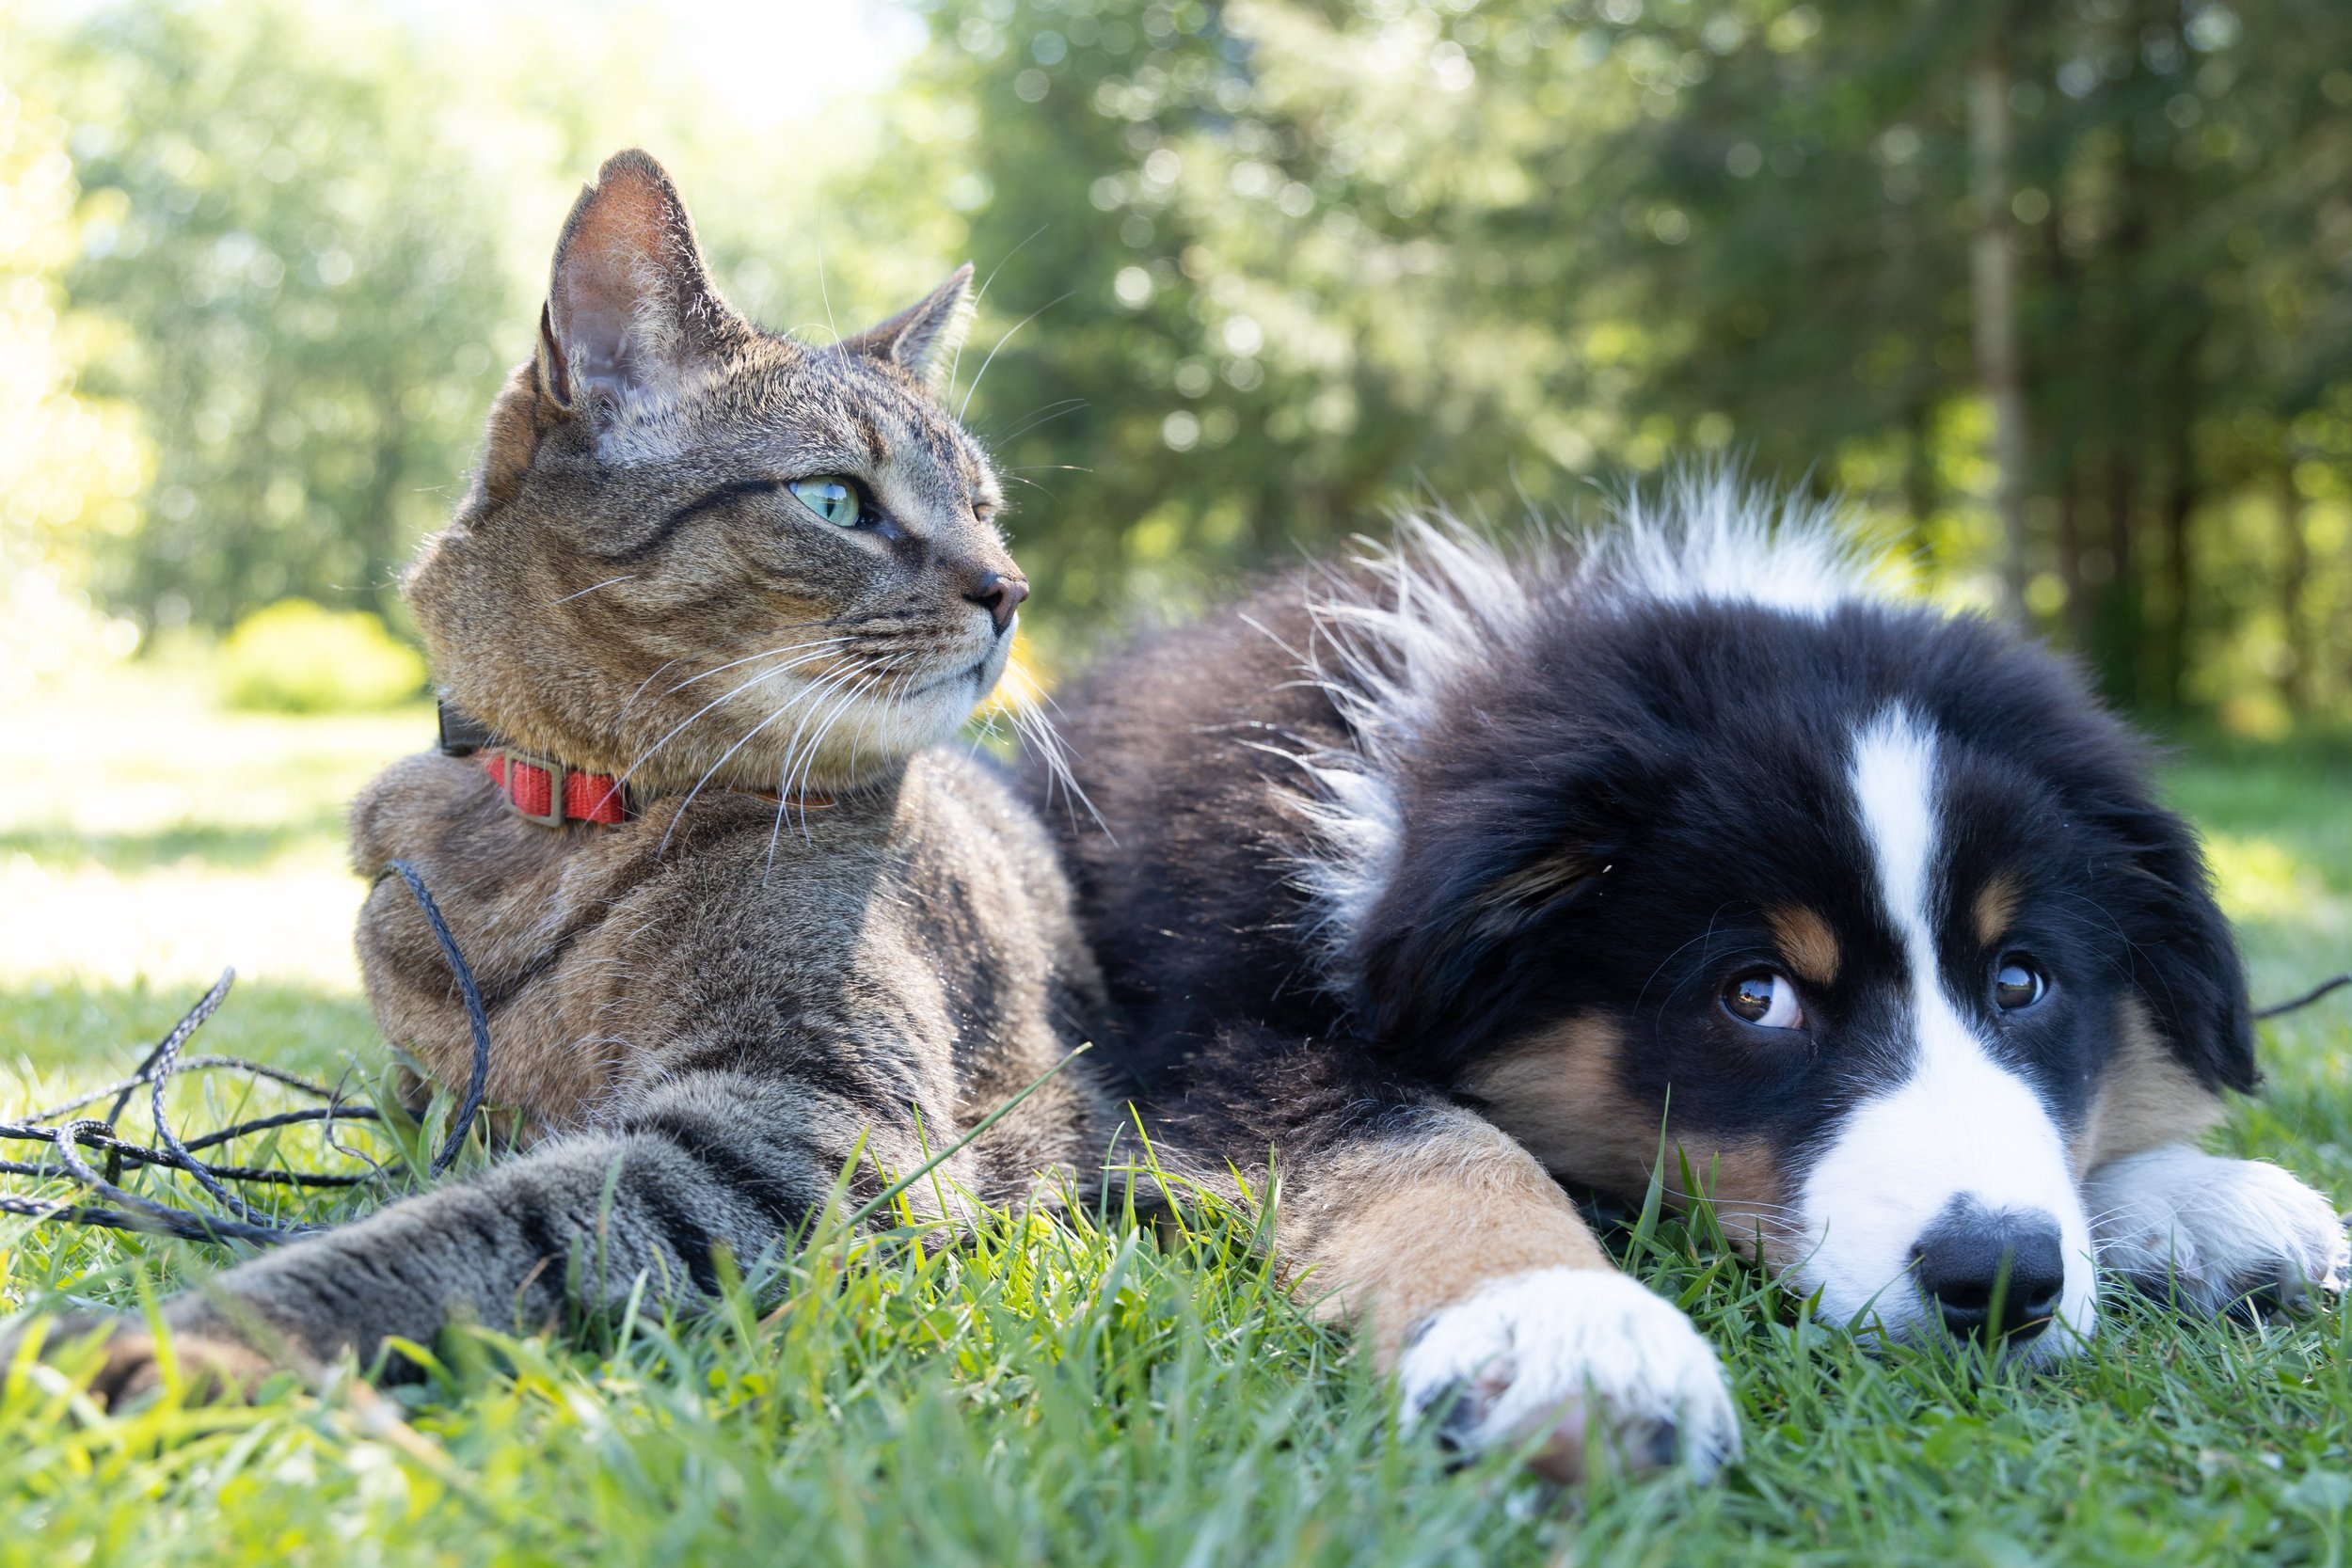 Are Dogs and Cats Colorblind?